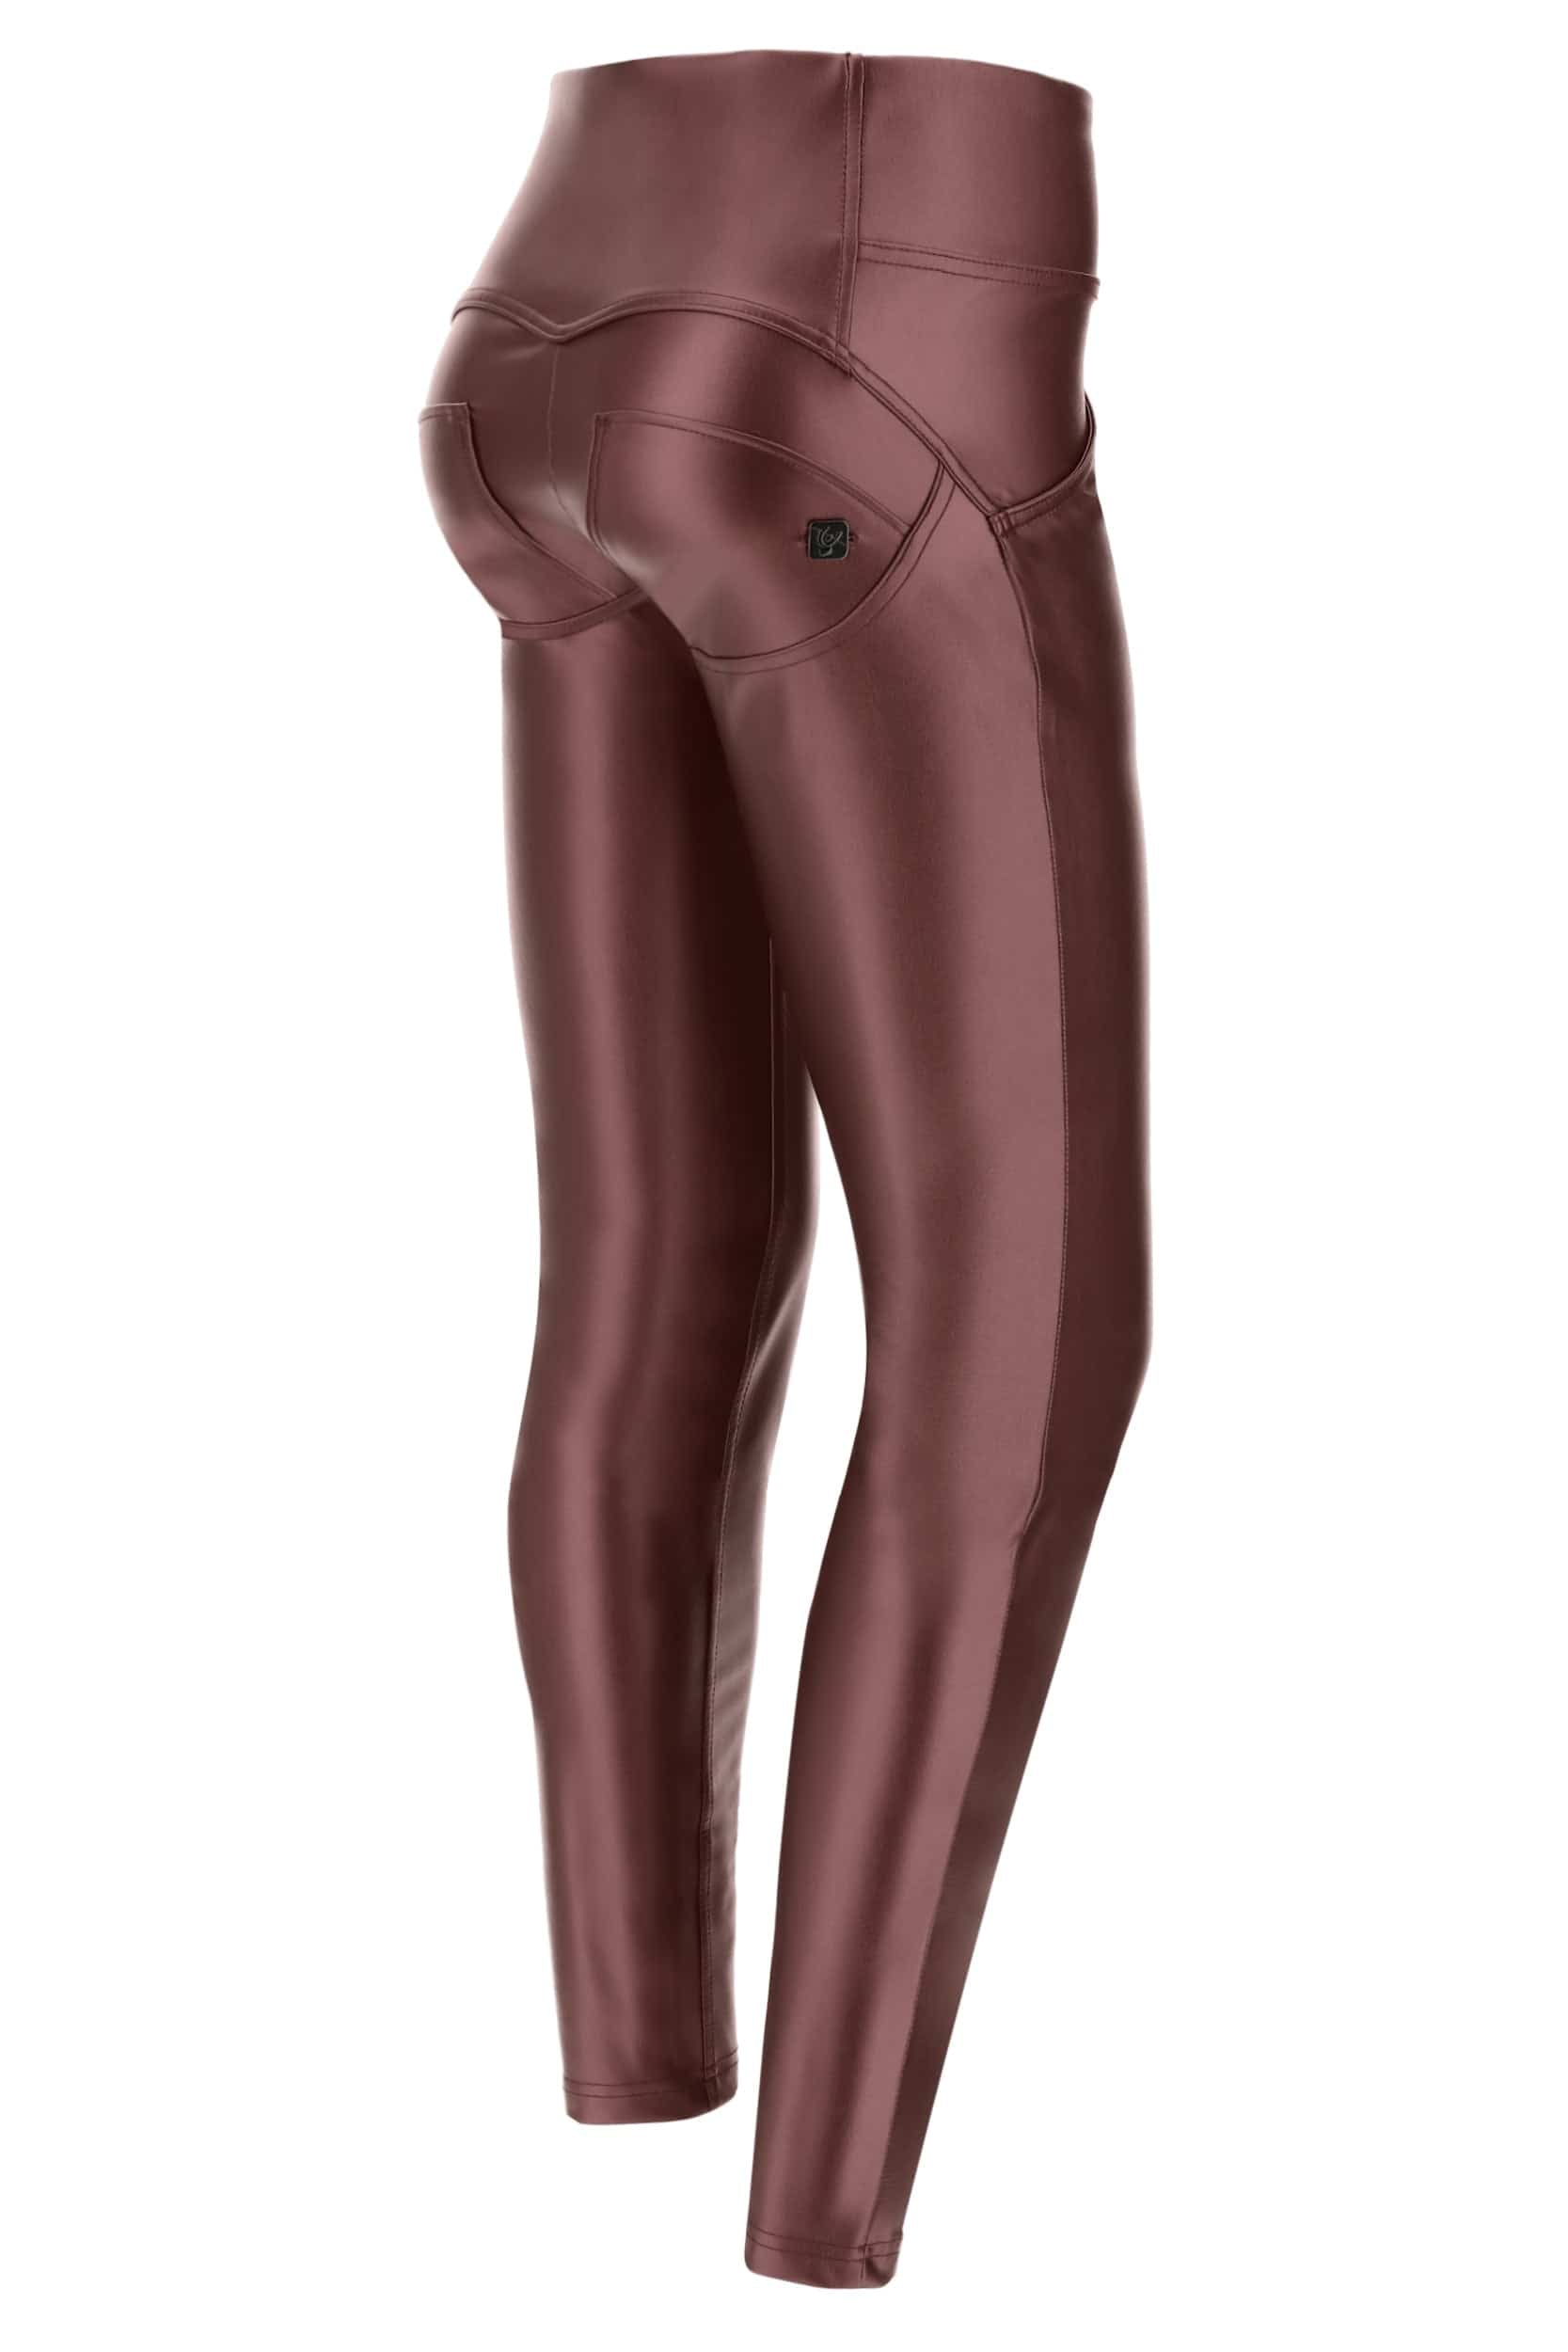 WR.UP® Metallic Faux Leather - 3 Button Mid Rise - Full Length - Burgundy 1